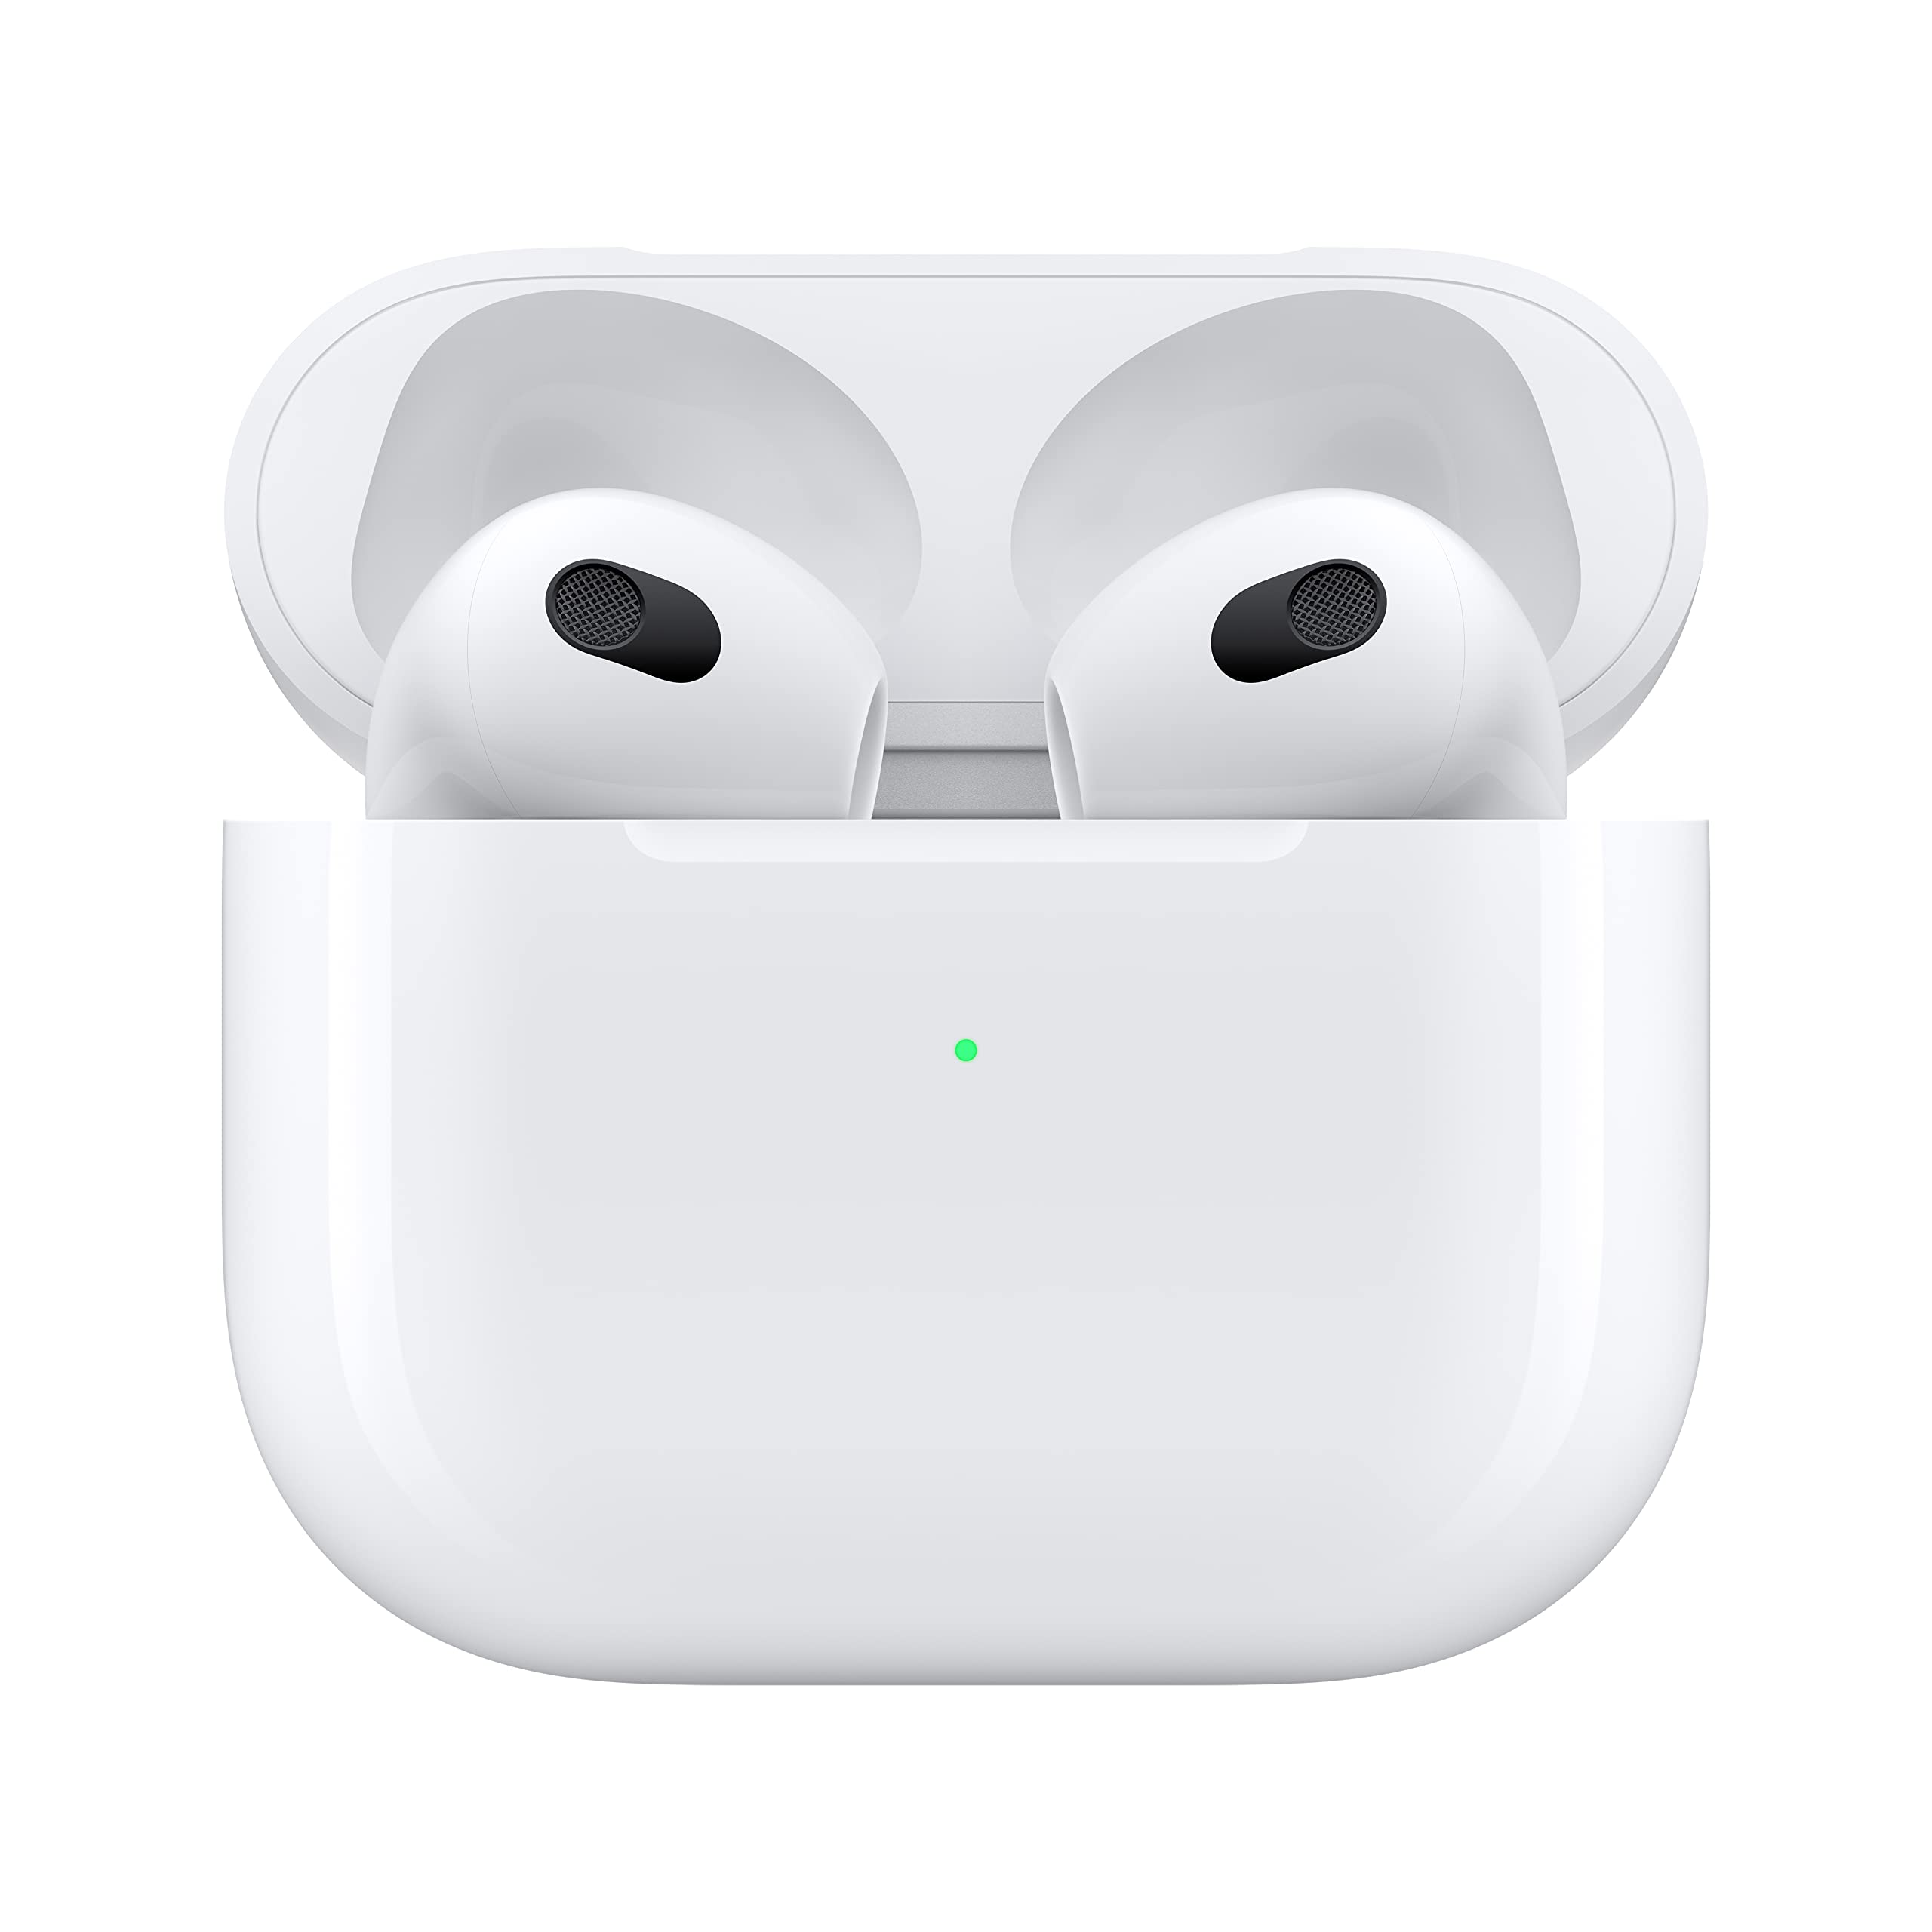 Apple AirPods Wireless Earbuds w/ Lightning Charging Case (3rd Generation) $140 + Free Shipping